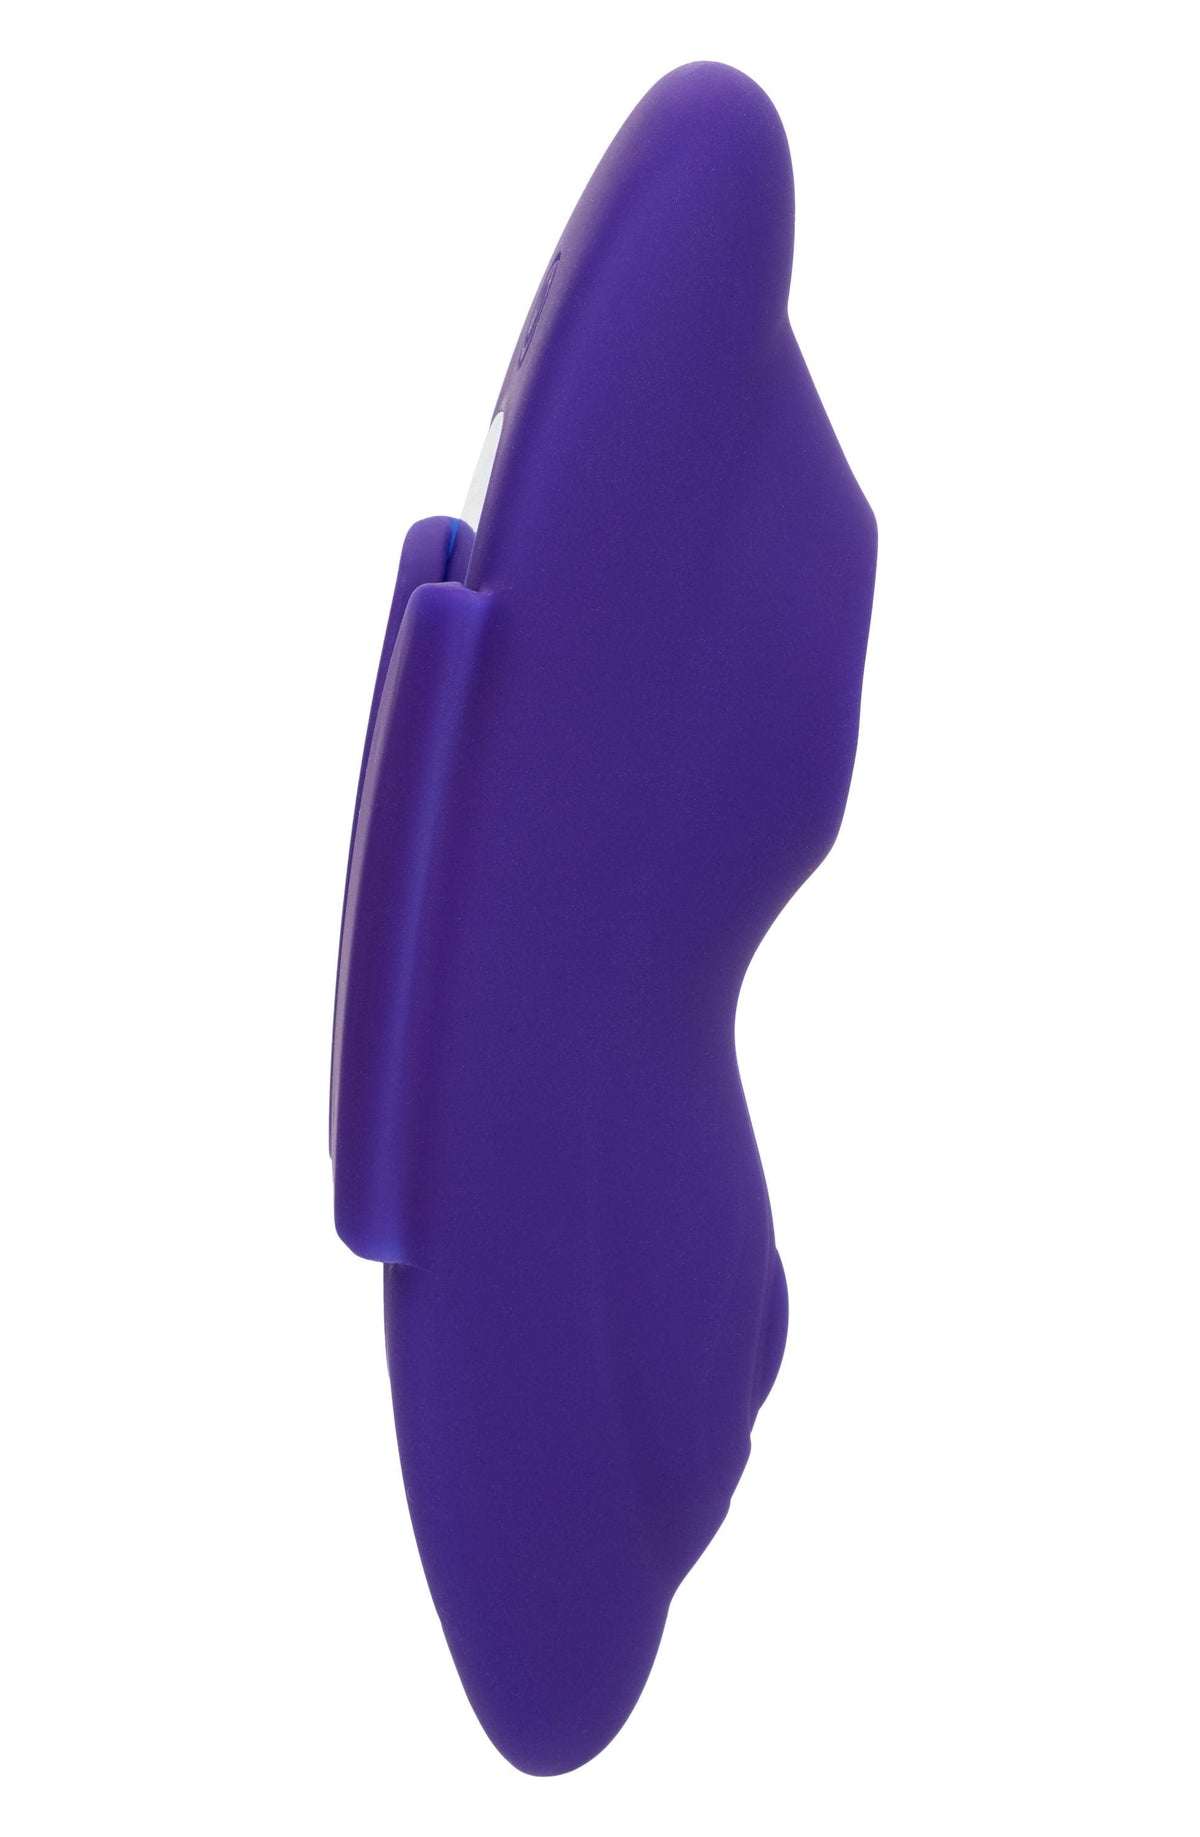 lock n play remote suction panty teaser purple